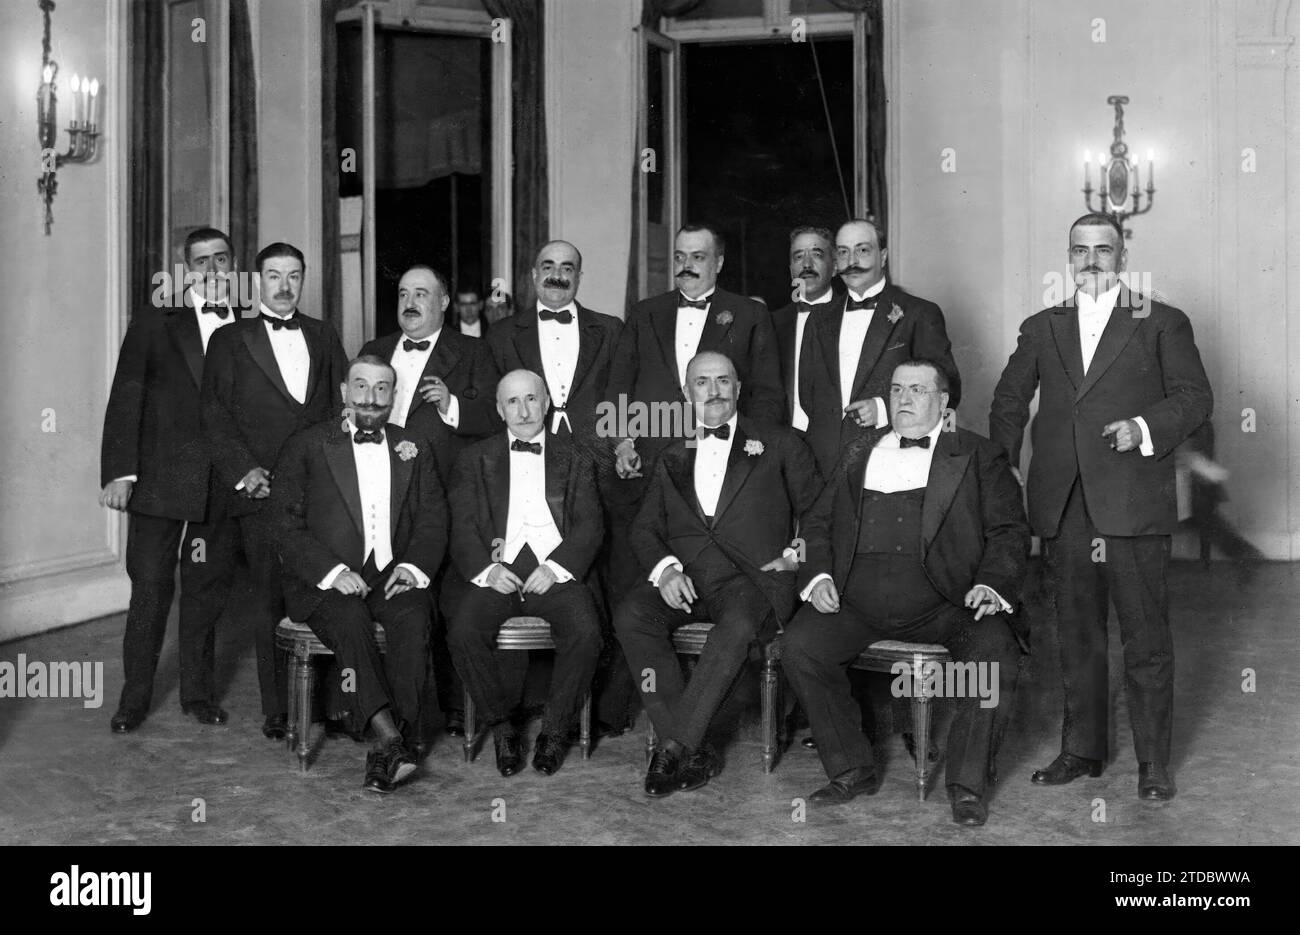 06/30/1917. At the Ritz Hotel - the mayor Mr. Prado y Palacio (1) with the Undersecretary of the Interior, Sáenz de Quejana (2), and the Conservative Deputy Mayors, to whom he presented a banquet to celebrate his appointment. Credit: Album / Archivo ABC / Julio Duque Stock Photo